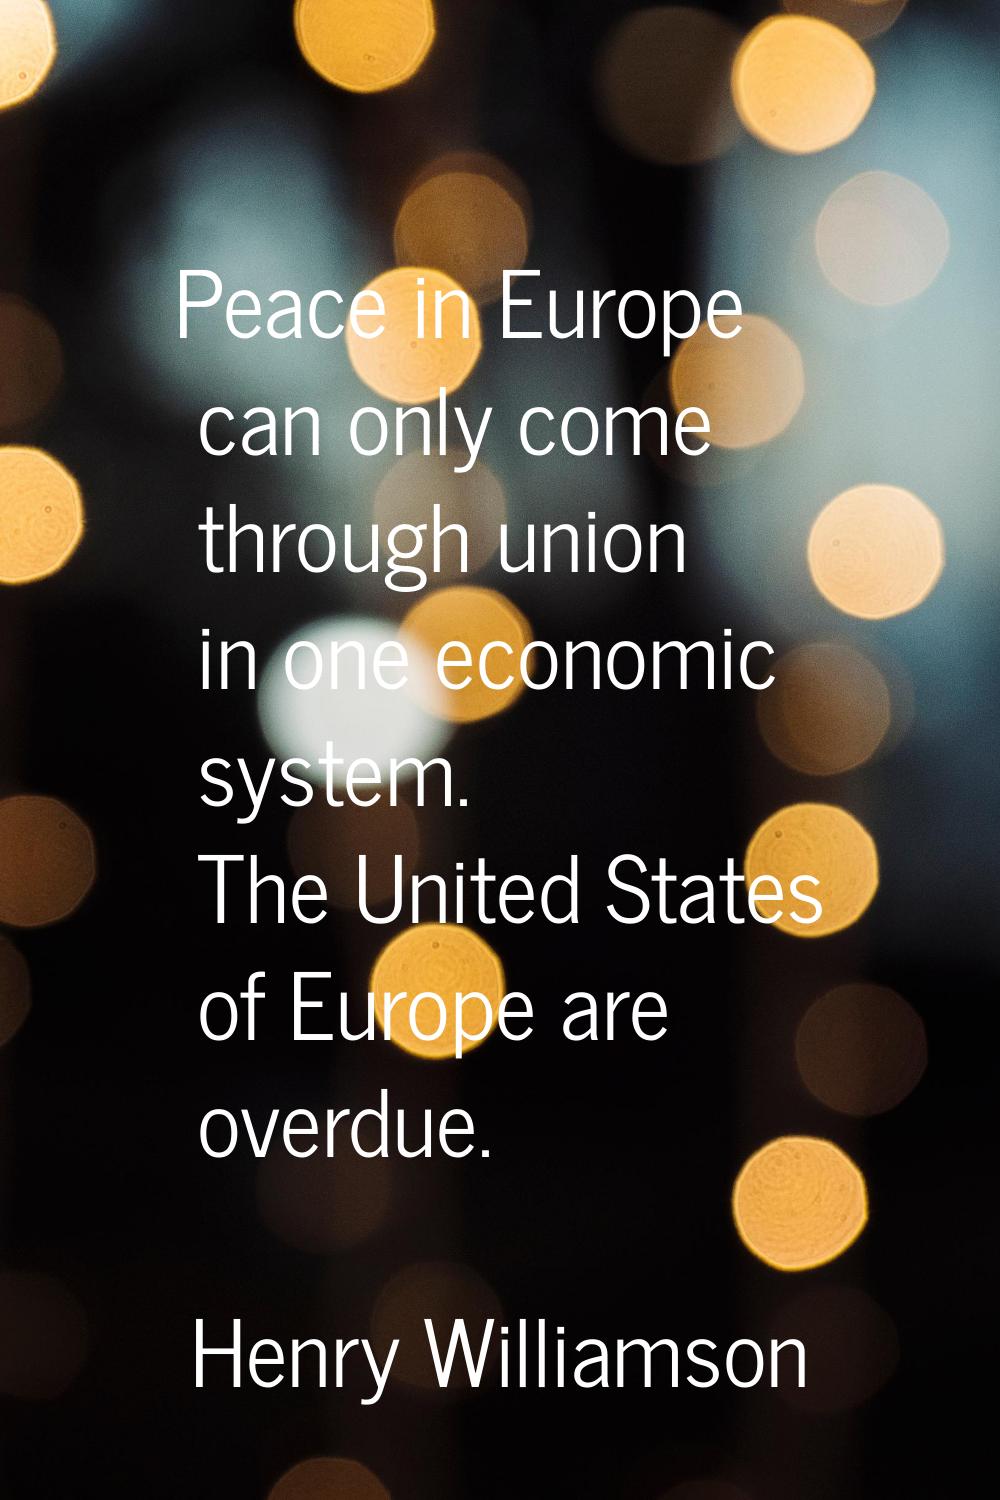 Peace in Europe can only come through union in one economic system. The United States of Europe are